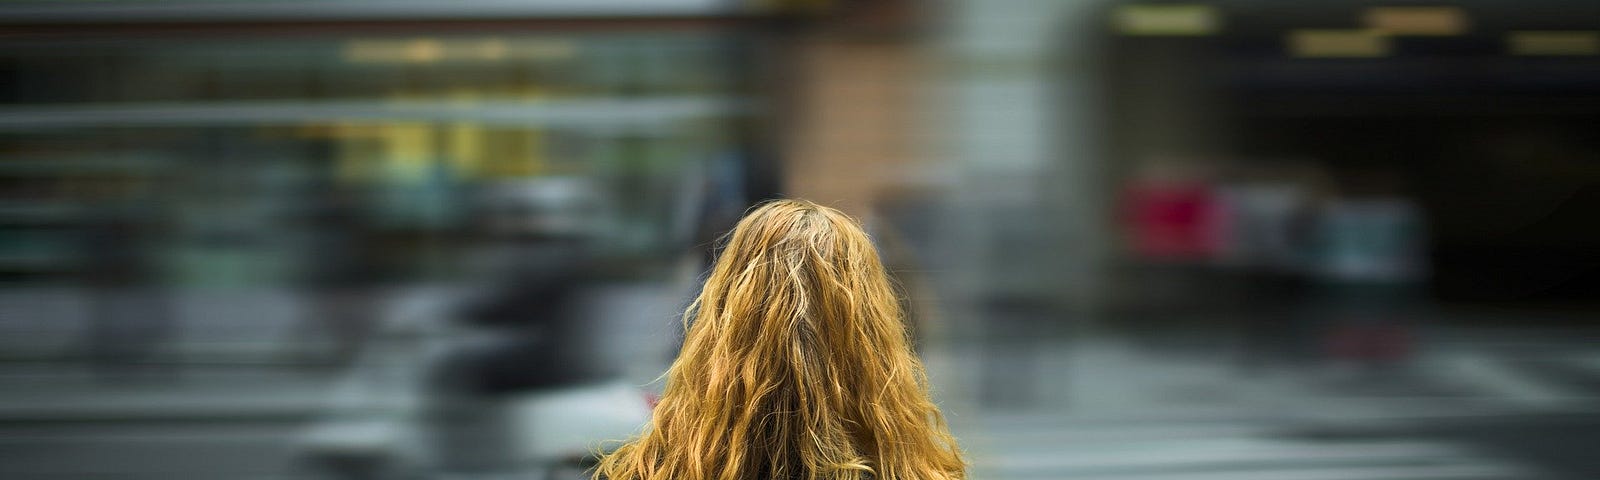 A woman with long, wavy brown hair and a dark top has her back to the camera, and is looking out onto a busy, blurred street.